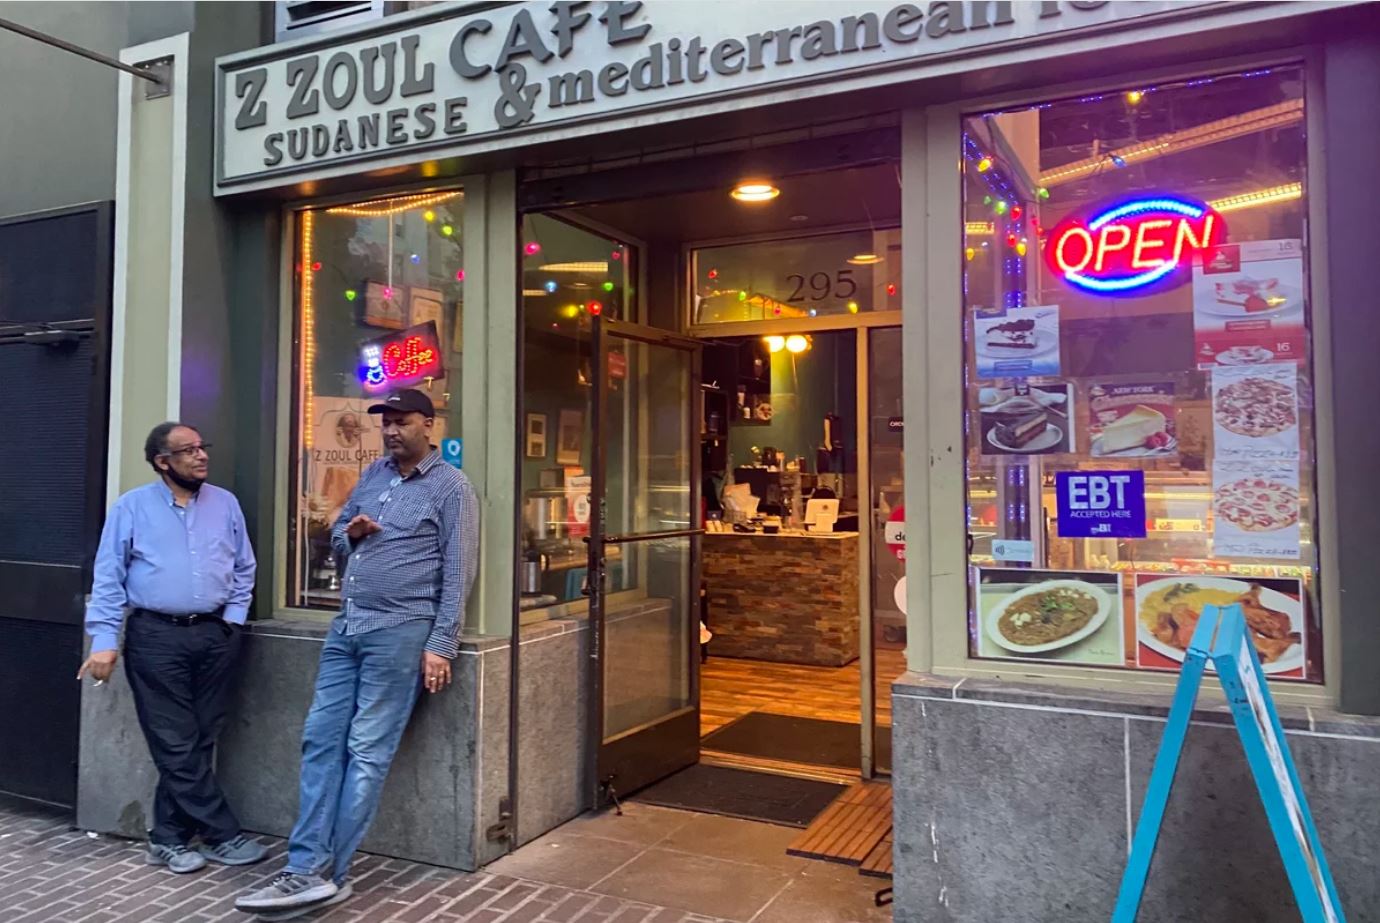 Two people stand outside a business in the Tenderloin. The business has a sign that reads, "Z Zoul Cafe Sudanese and Mediterranean Food."